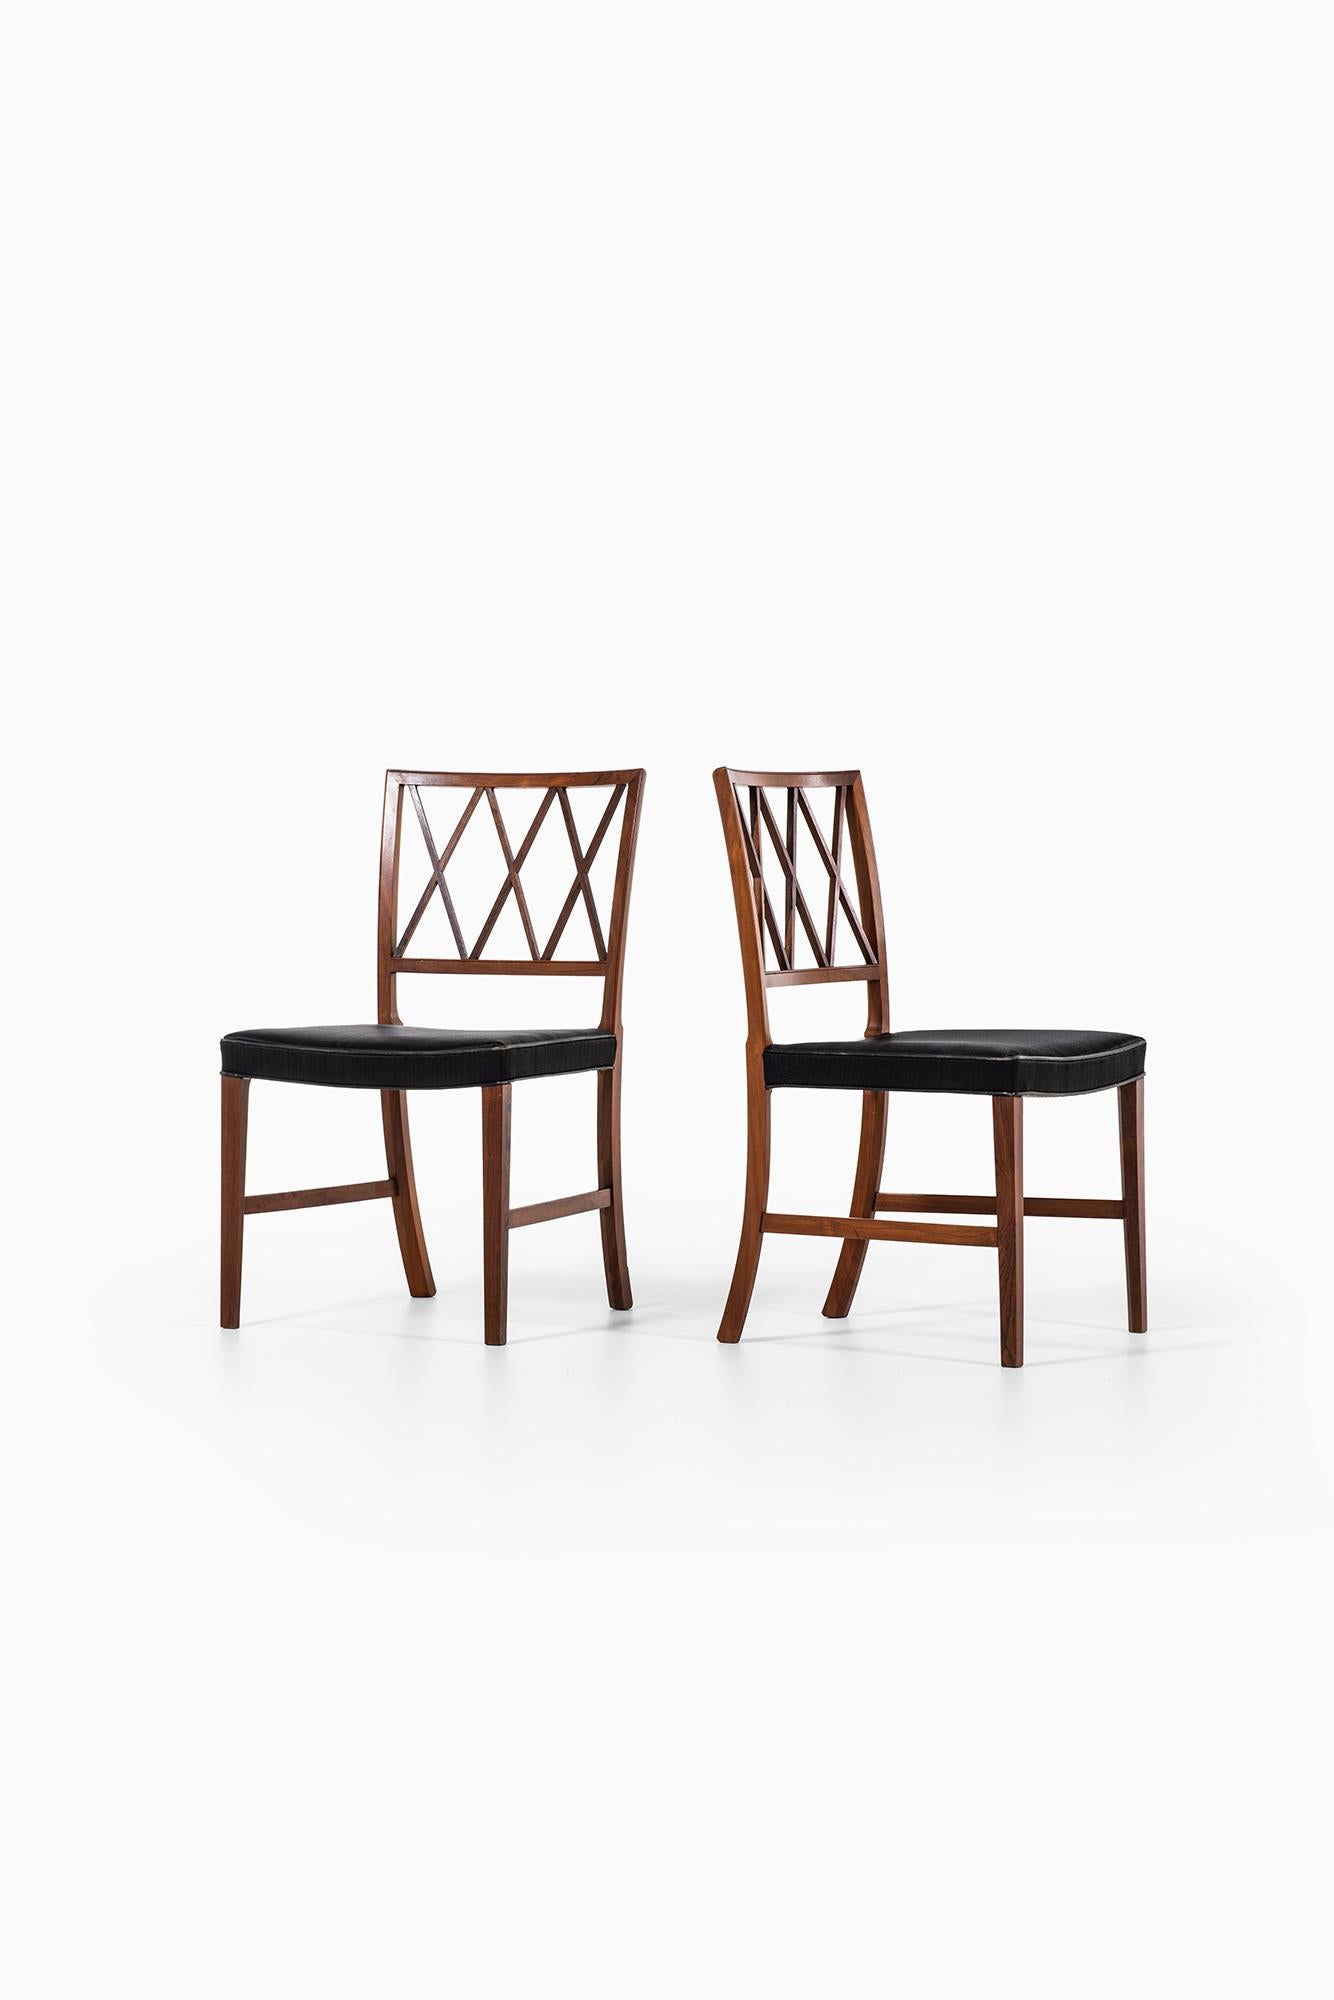 Rare set of 12 dining chairs designed by Ole Wanscher. Produced by cabinetmaker A.J Iversen in Denmark. Rosewood and original horsehair with black leather piping.